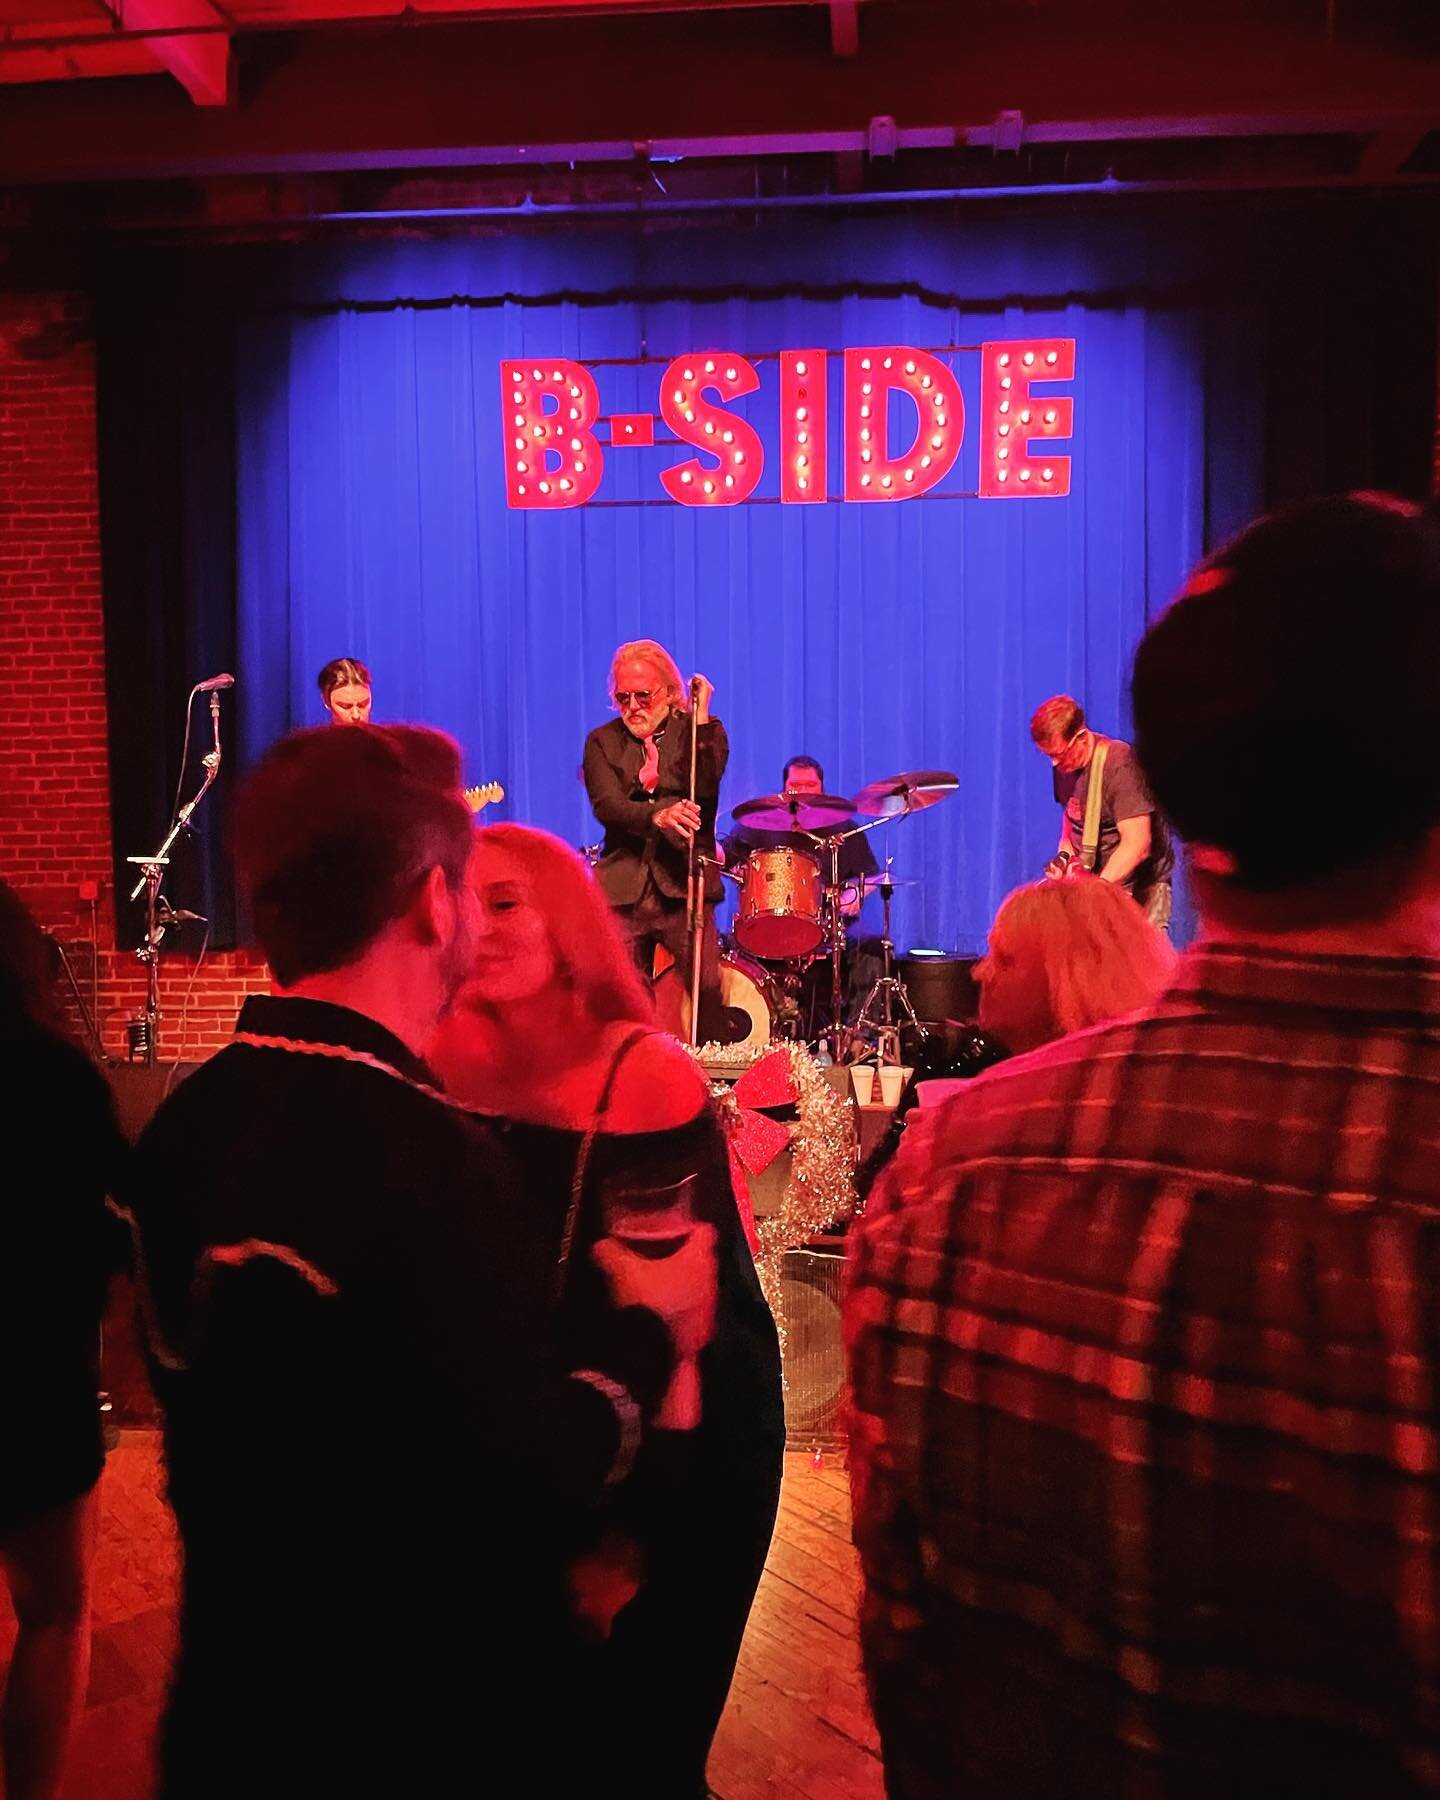 Thanks to those who attended the New Year&rsquo;s show @bsidememphis&hellip; it was a wonderful time&hellip; see you @bar_dkdc in February&hellip; #thesmiths #morrissey #901